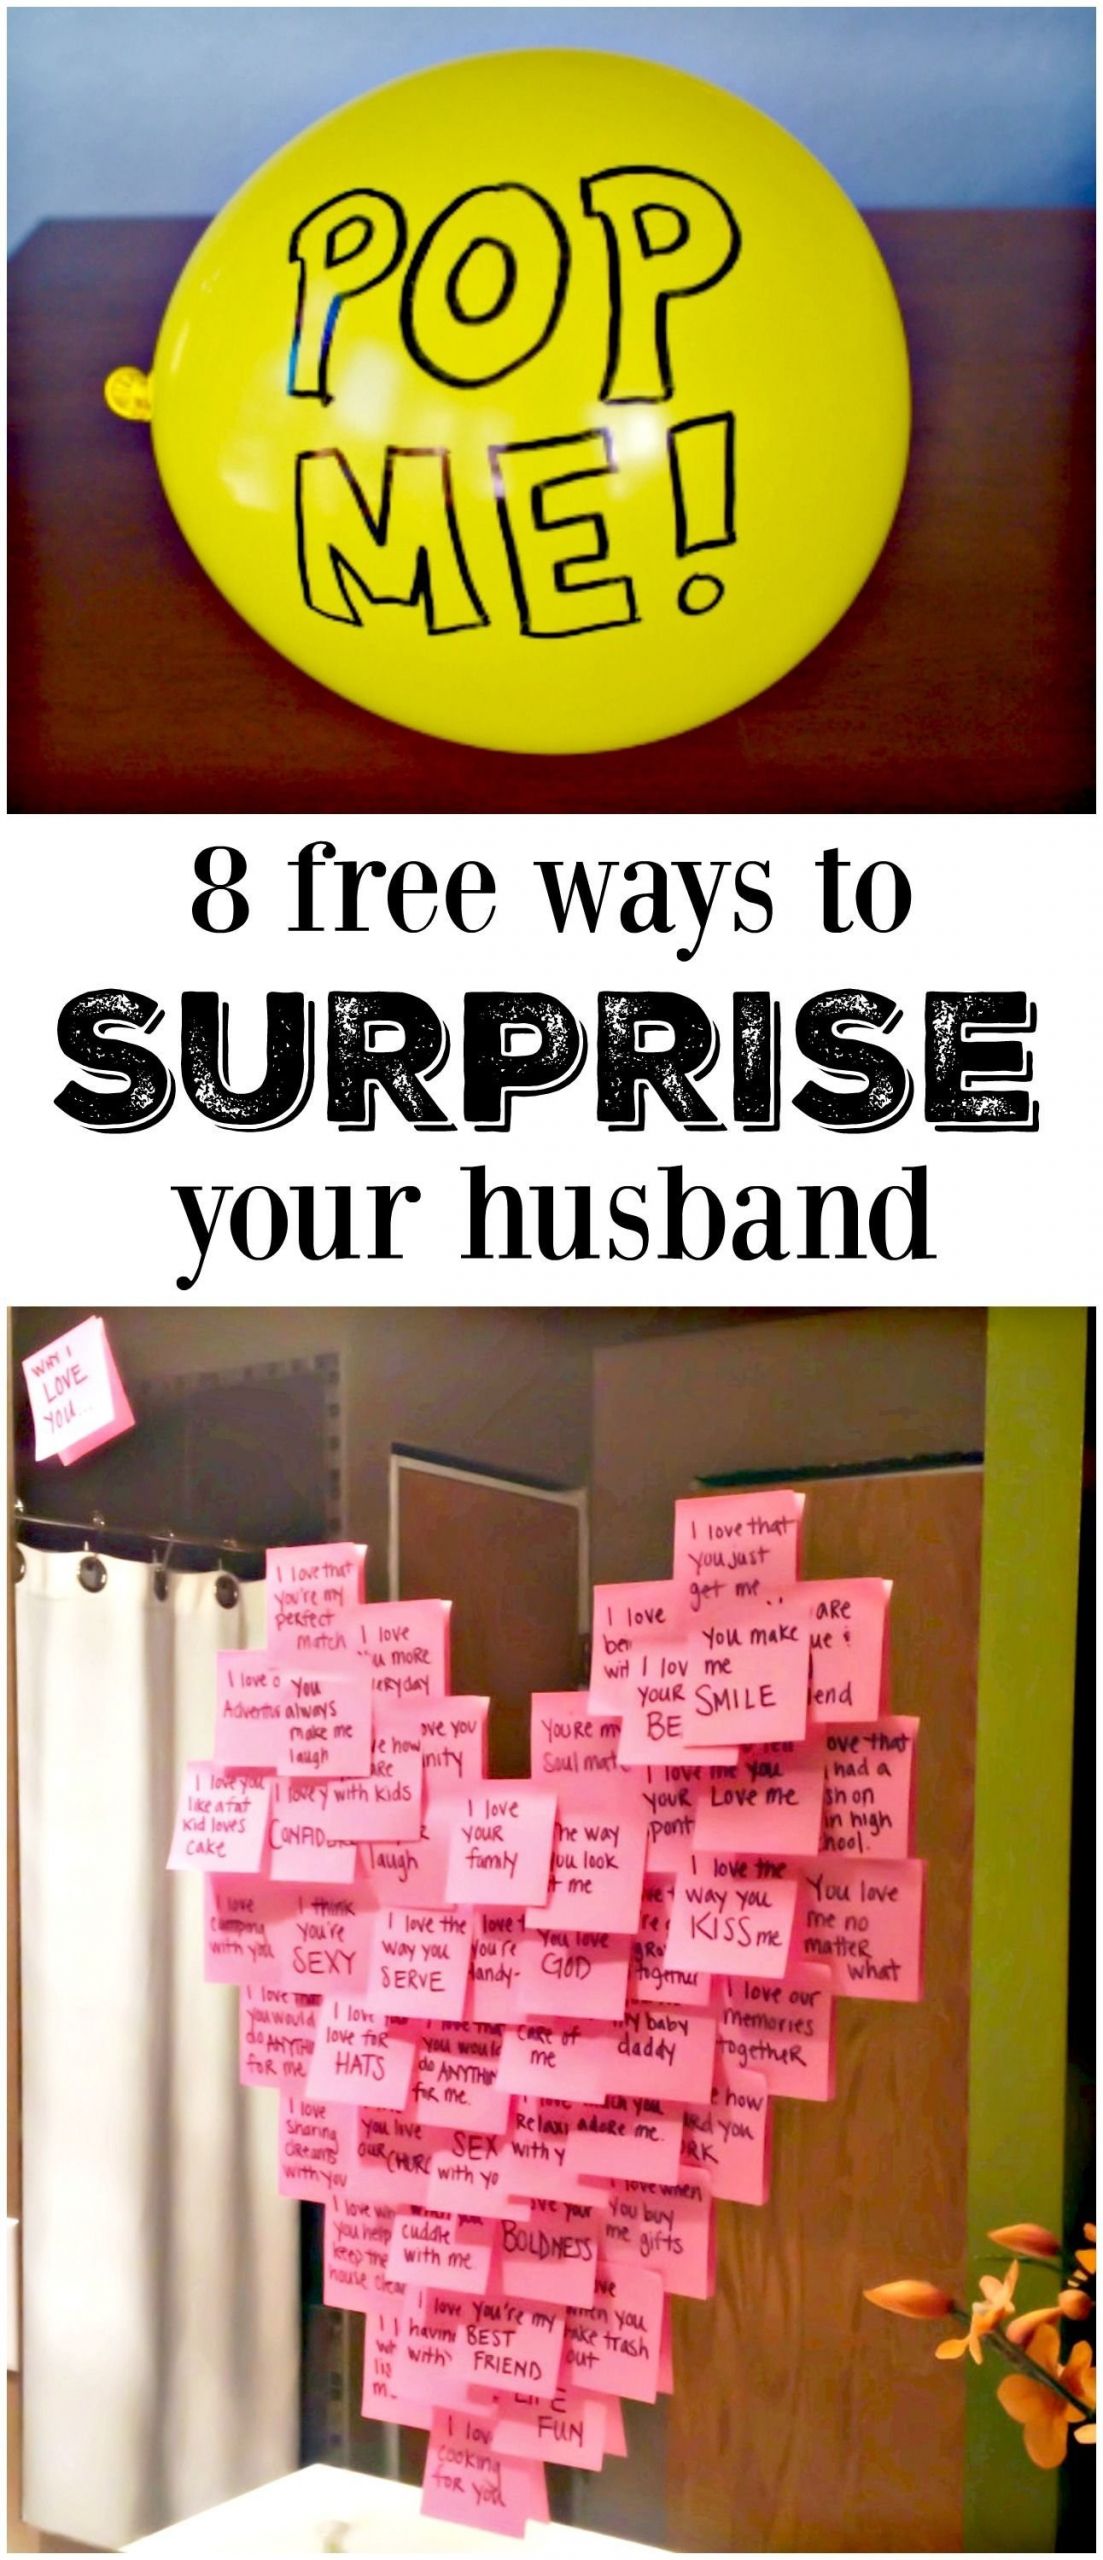 Unique Birthday Gifts For Husband
 10 Amazing Creative Birthday Ideas For Husband 2019